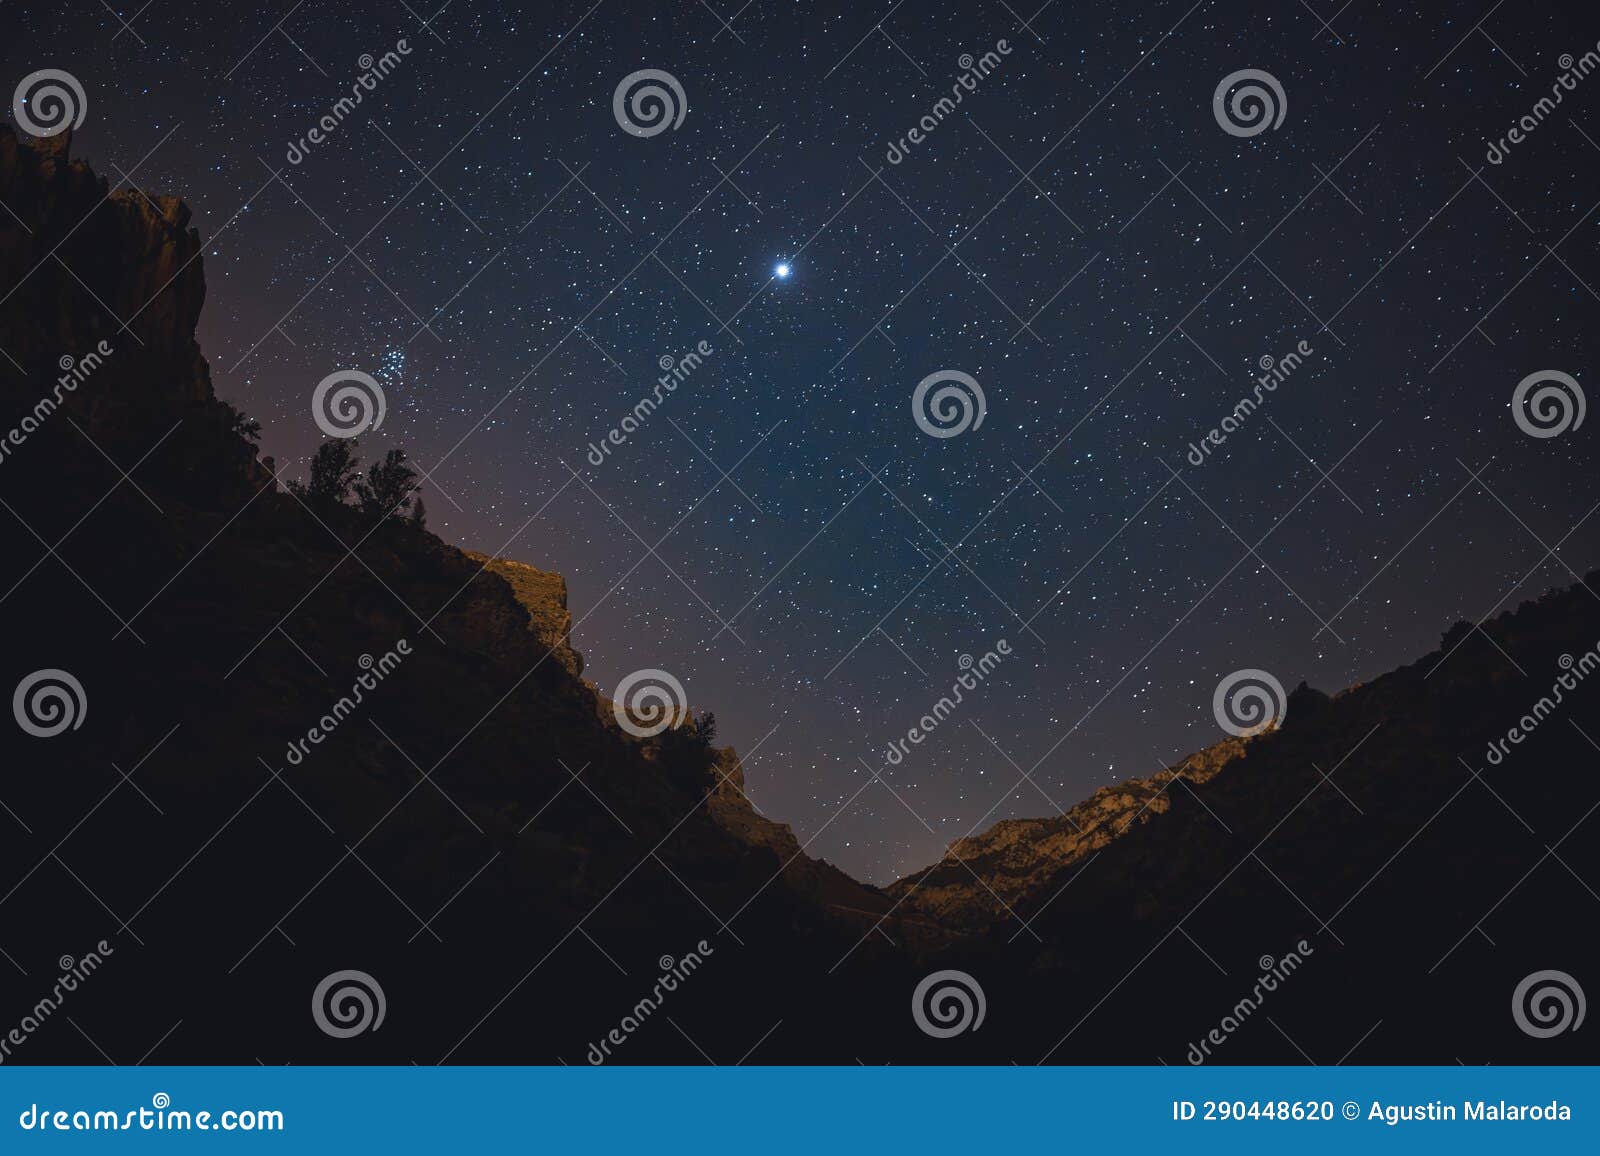 milky way in the starry night between mountains with meteor shower